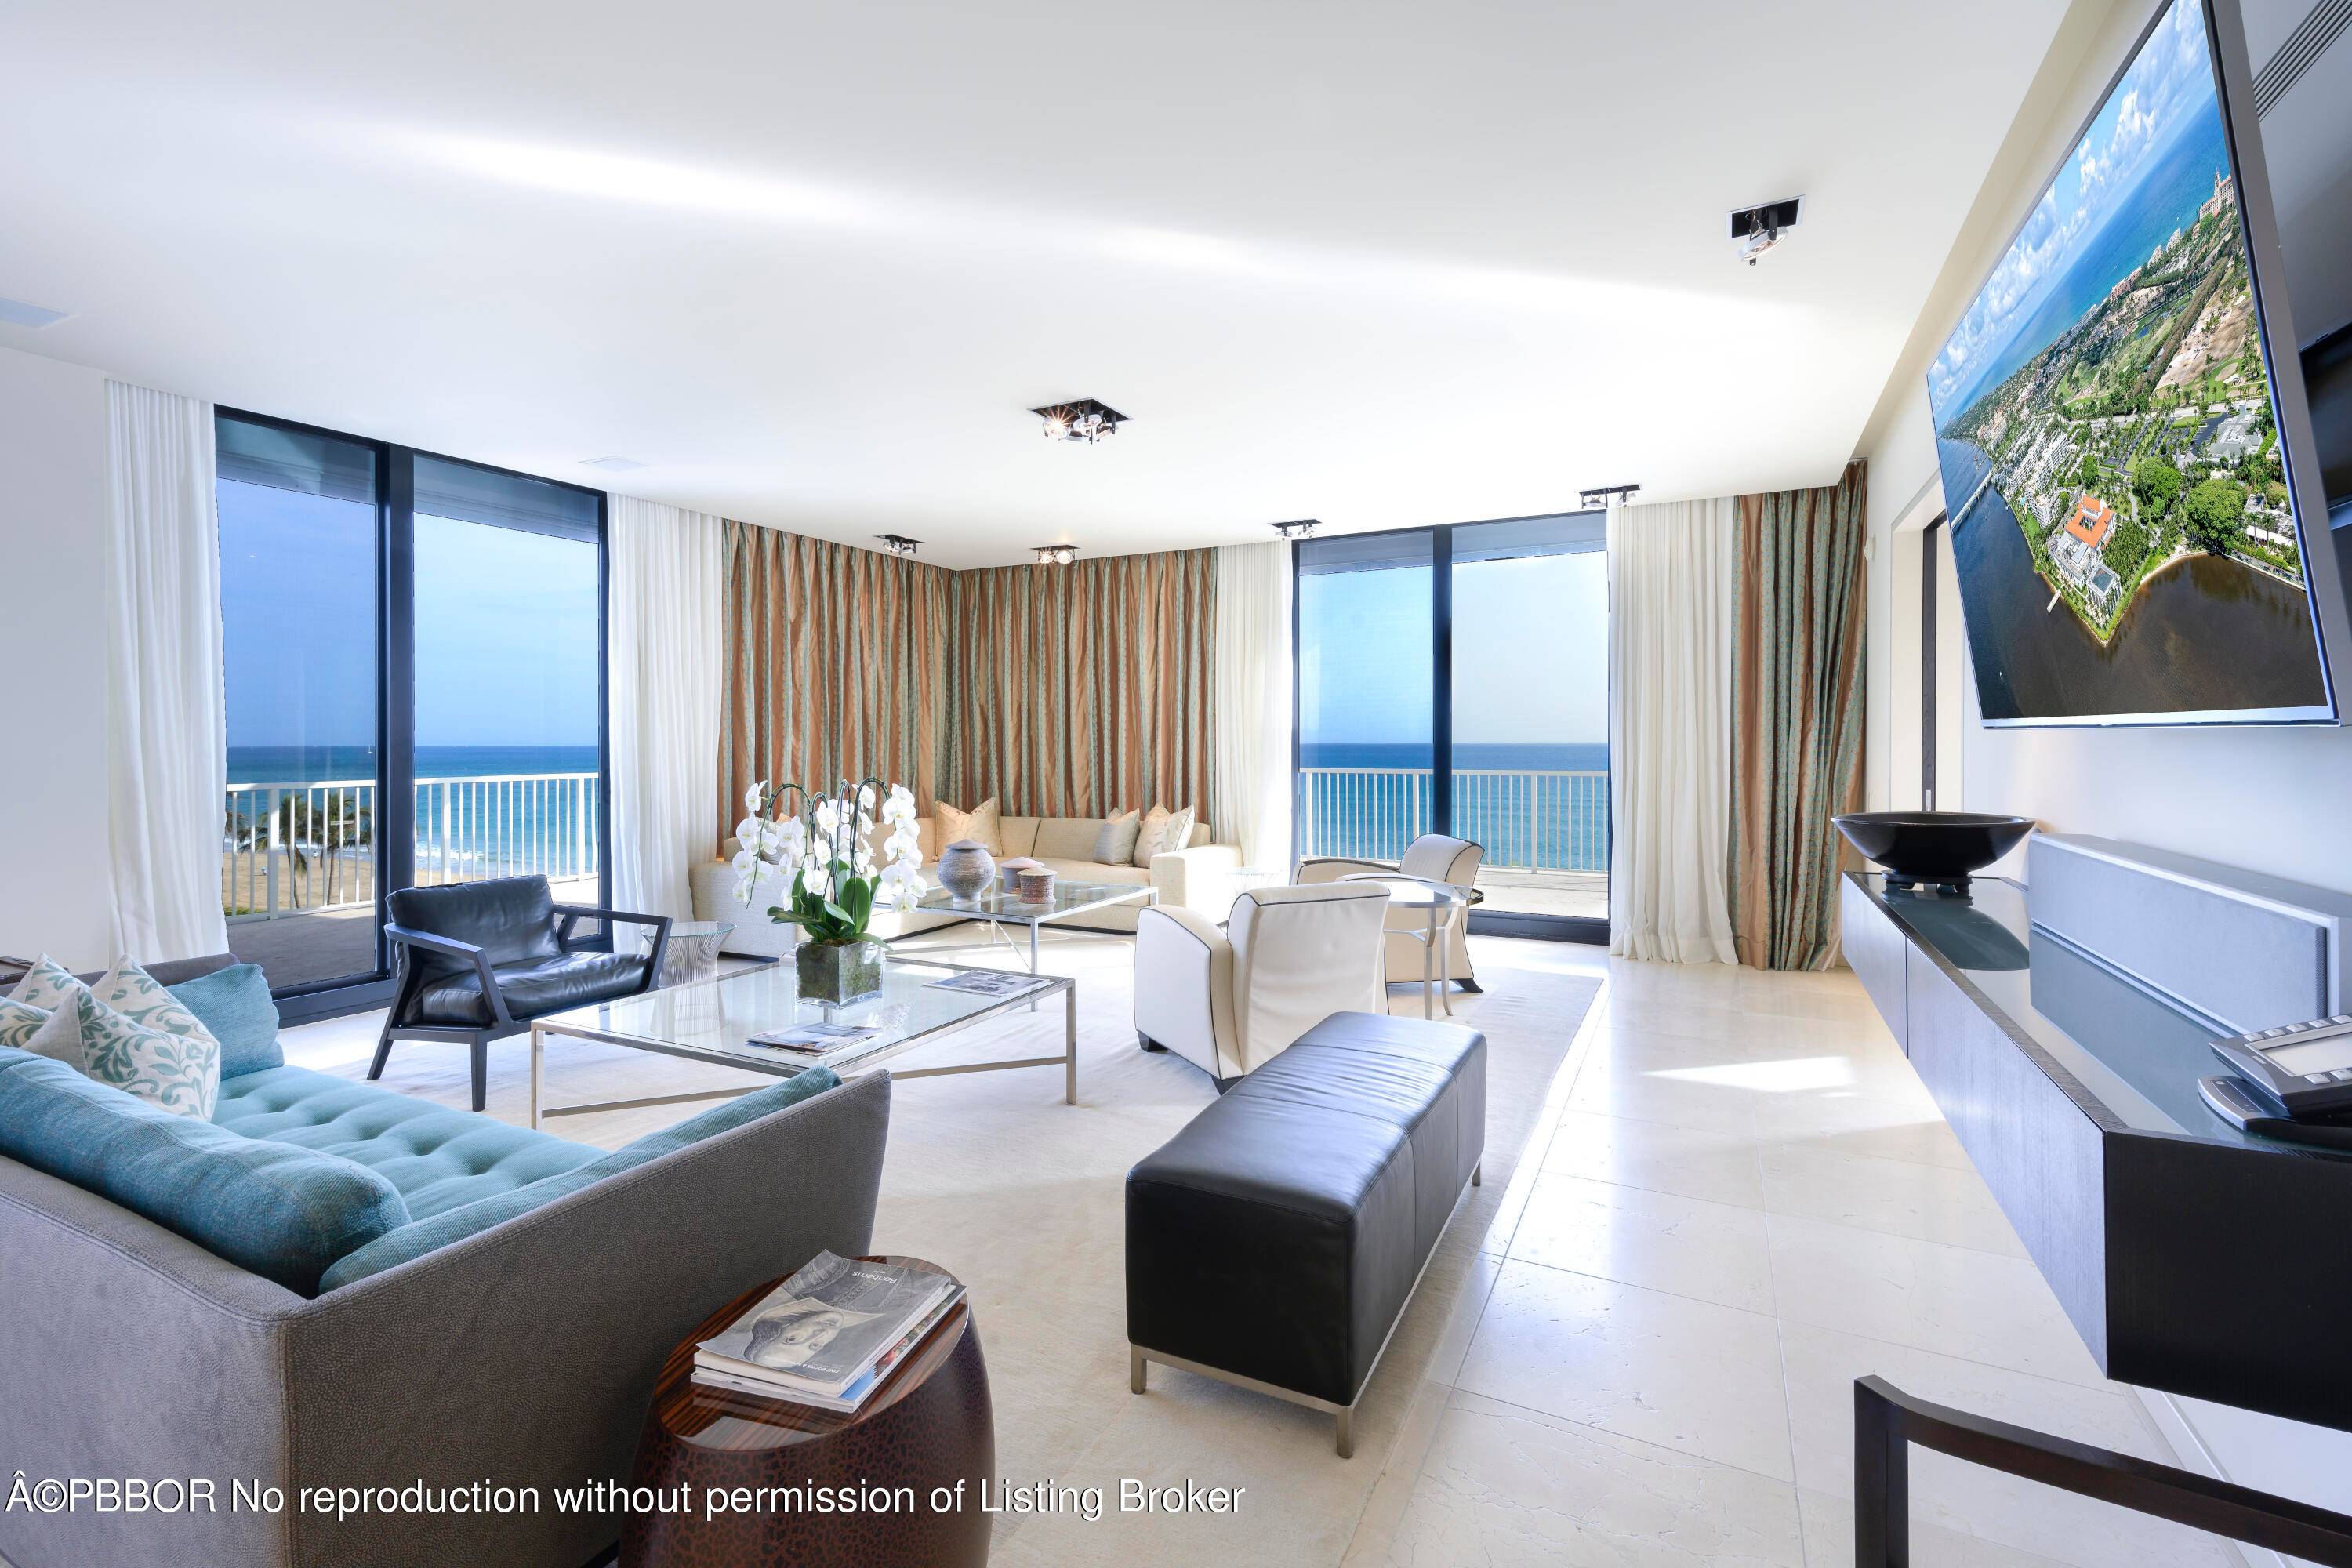 Direct Oceanfront Penthouse, 3 bedrooms, 3 baths, with high ceilings, surrounded by an additional 1, 450 SF wrap around terrace.